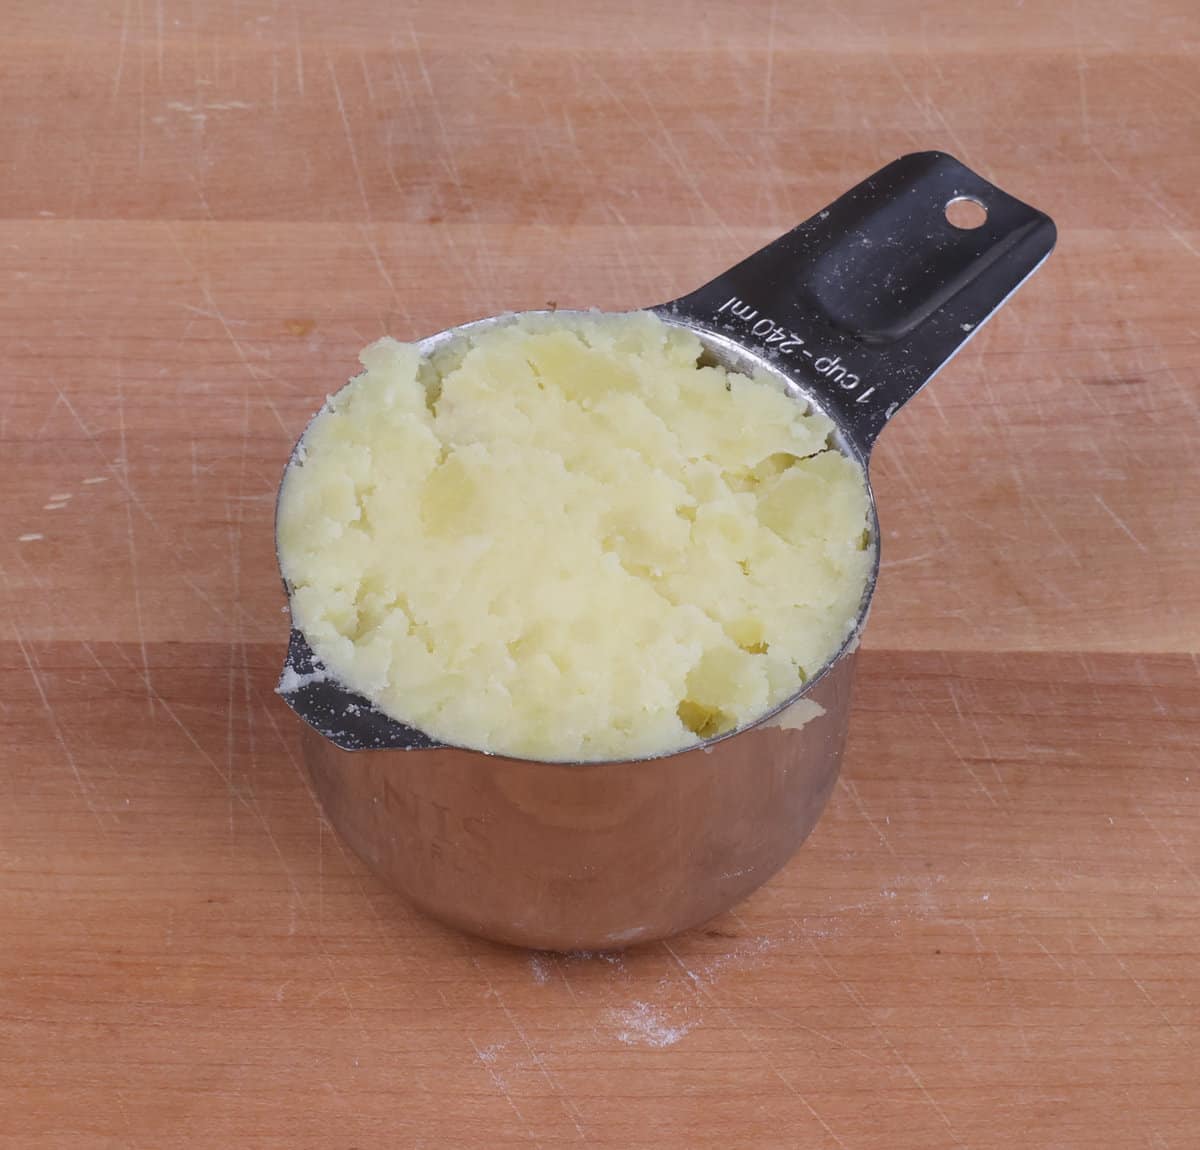 mashed potatoes packed into a measuring cup.